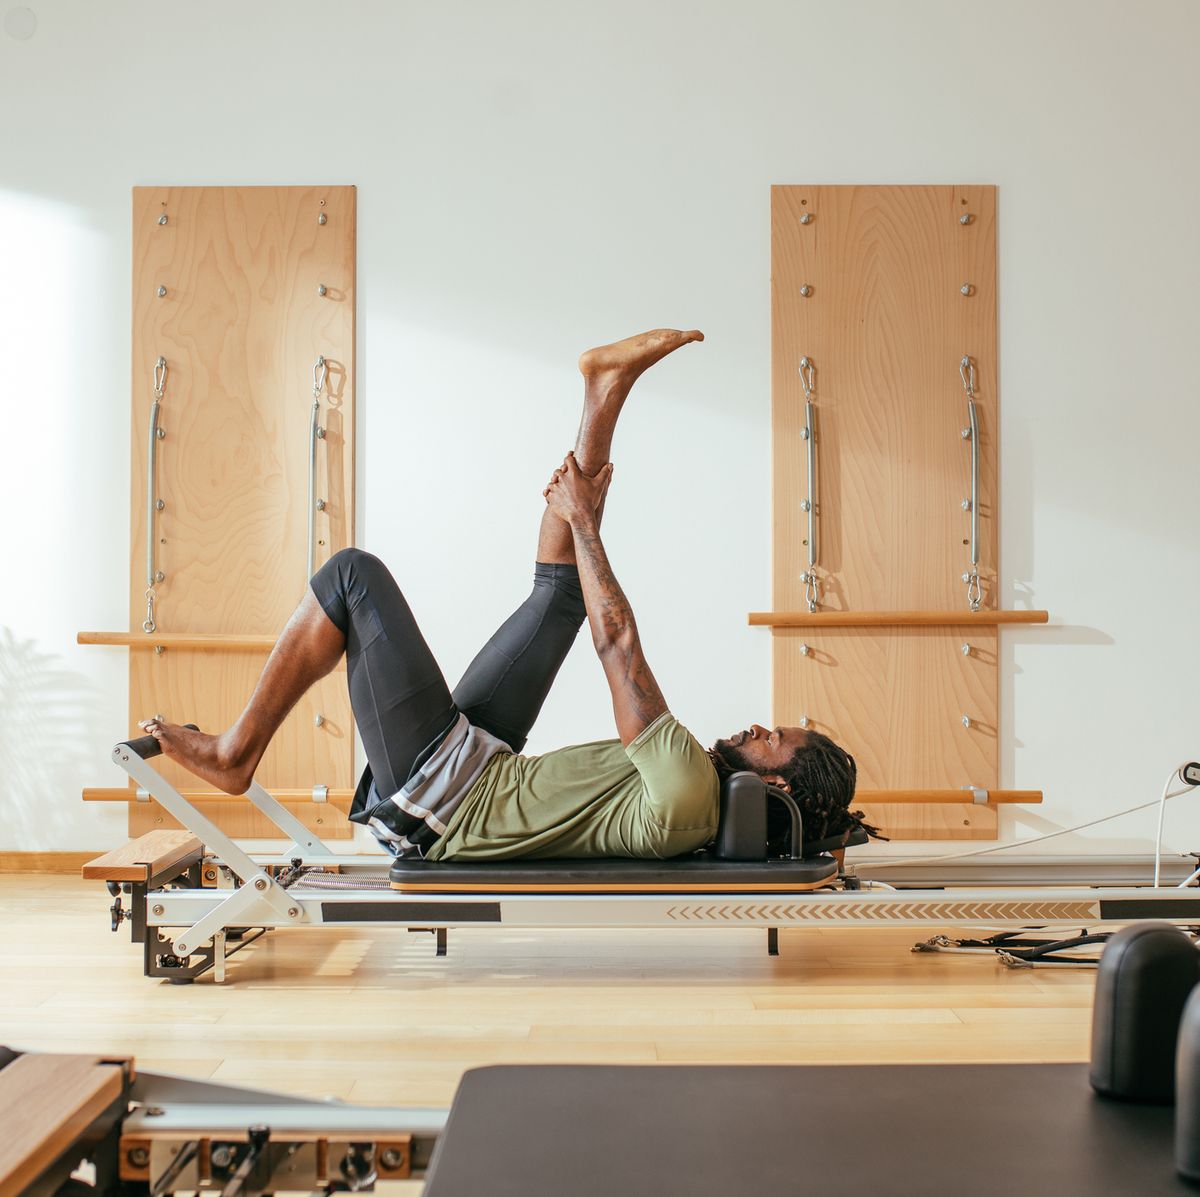 5 Pilates Exercises Men Can Do To Build Muscle - Pilates For Men